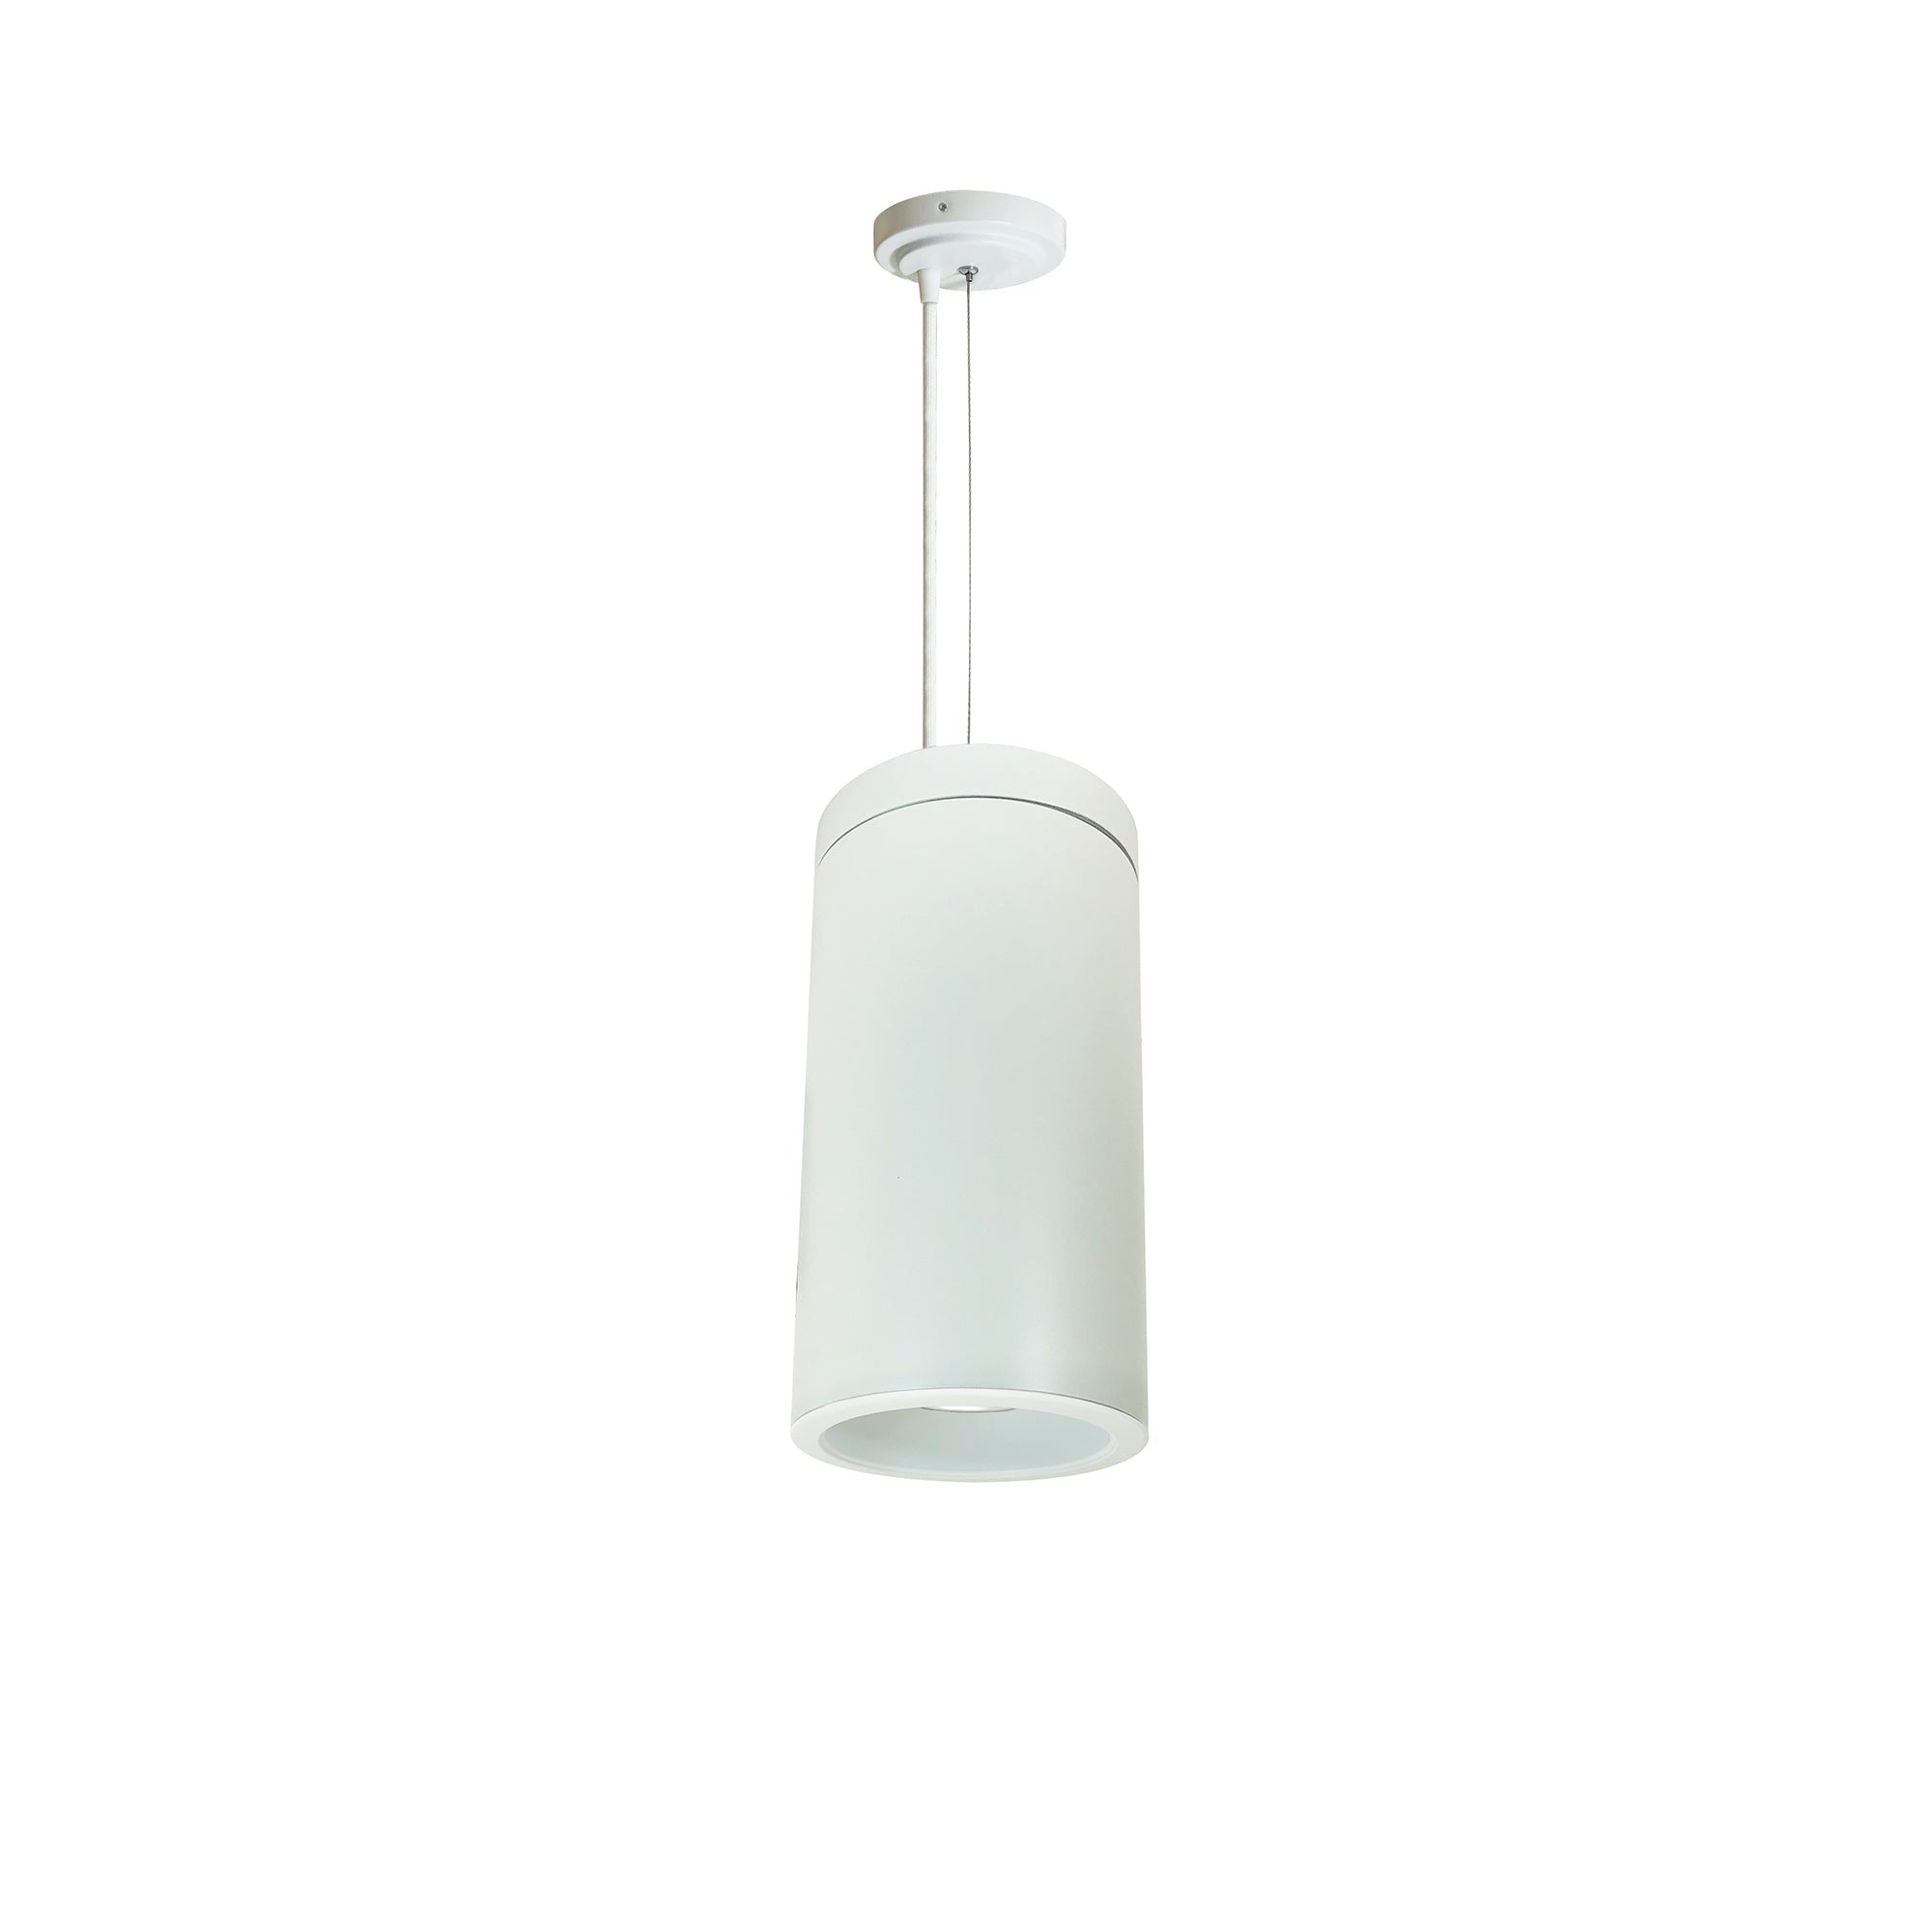 Nora Lighting NYLD2-6C075130WWWAC - Cylinder - 6 Inch Cylinder, White, Cable mount, Cobalt refl., 750L, 30K, White